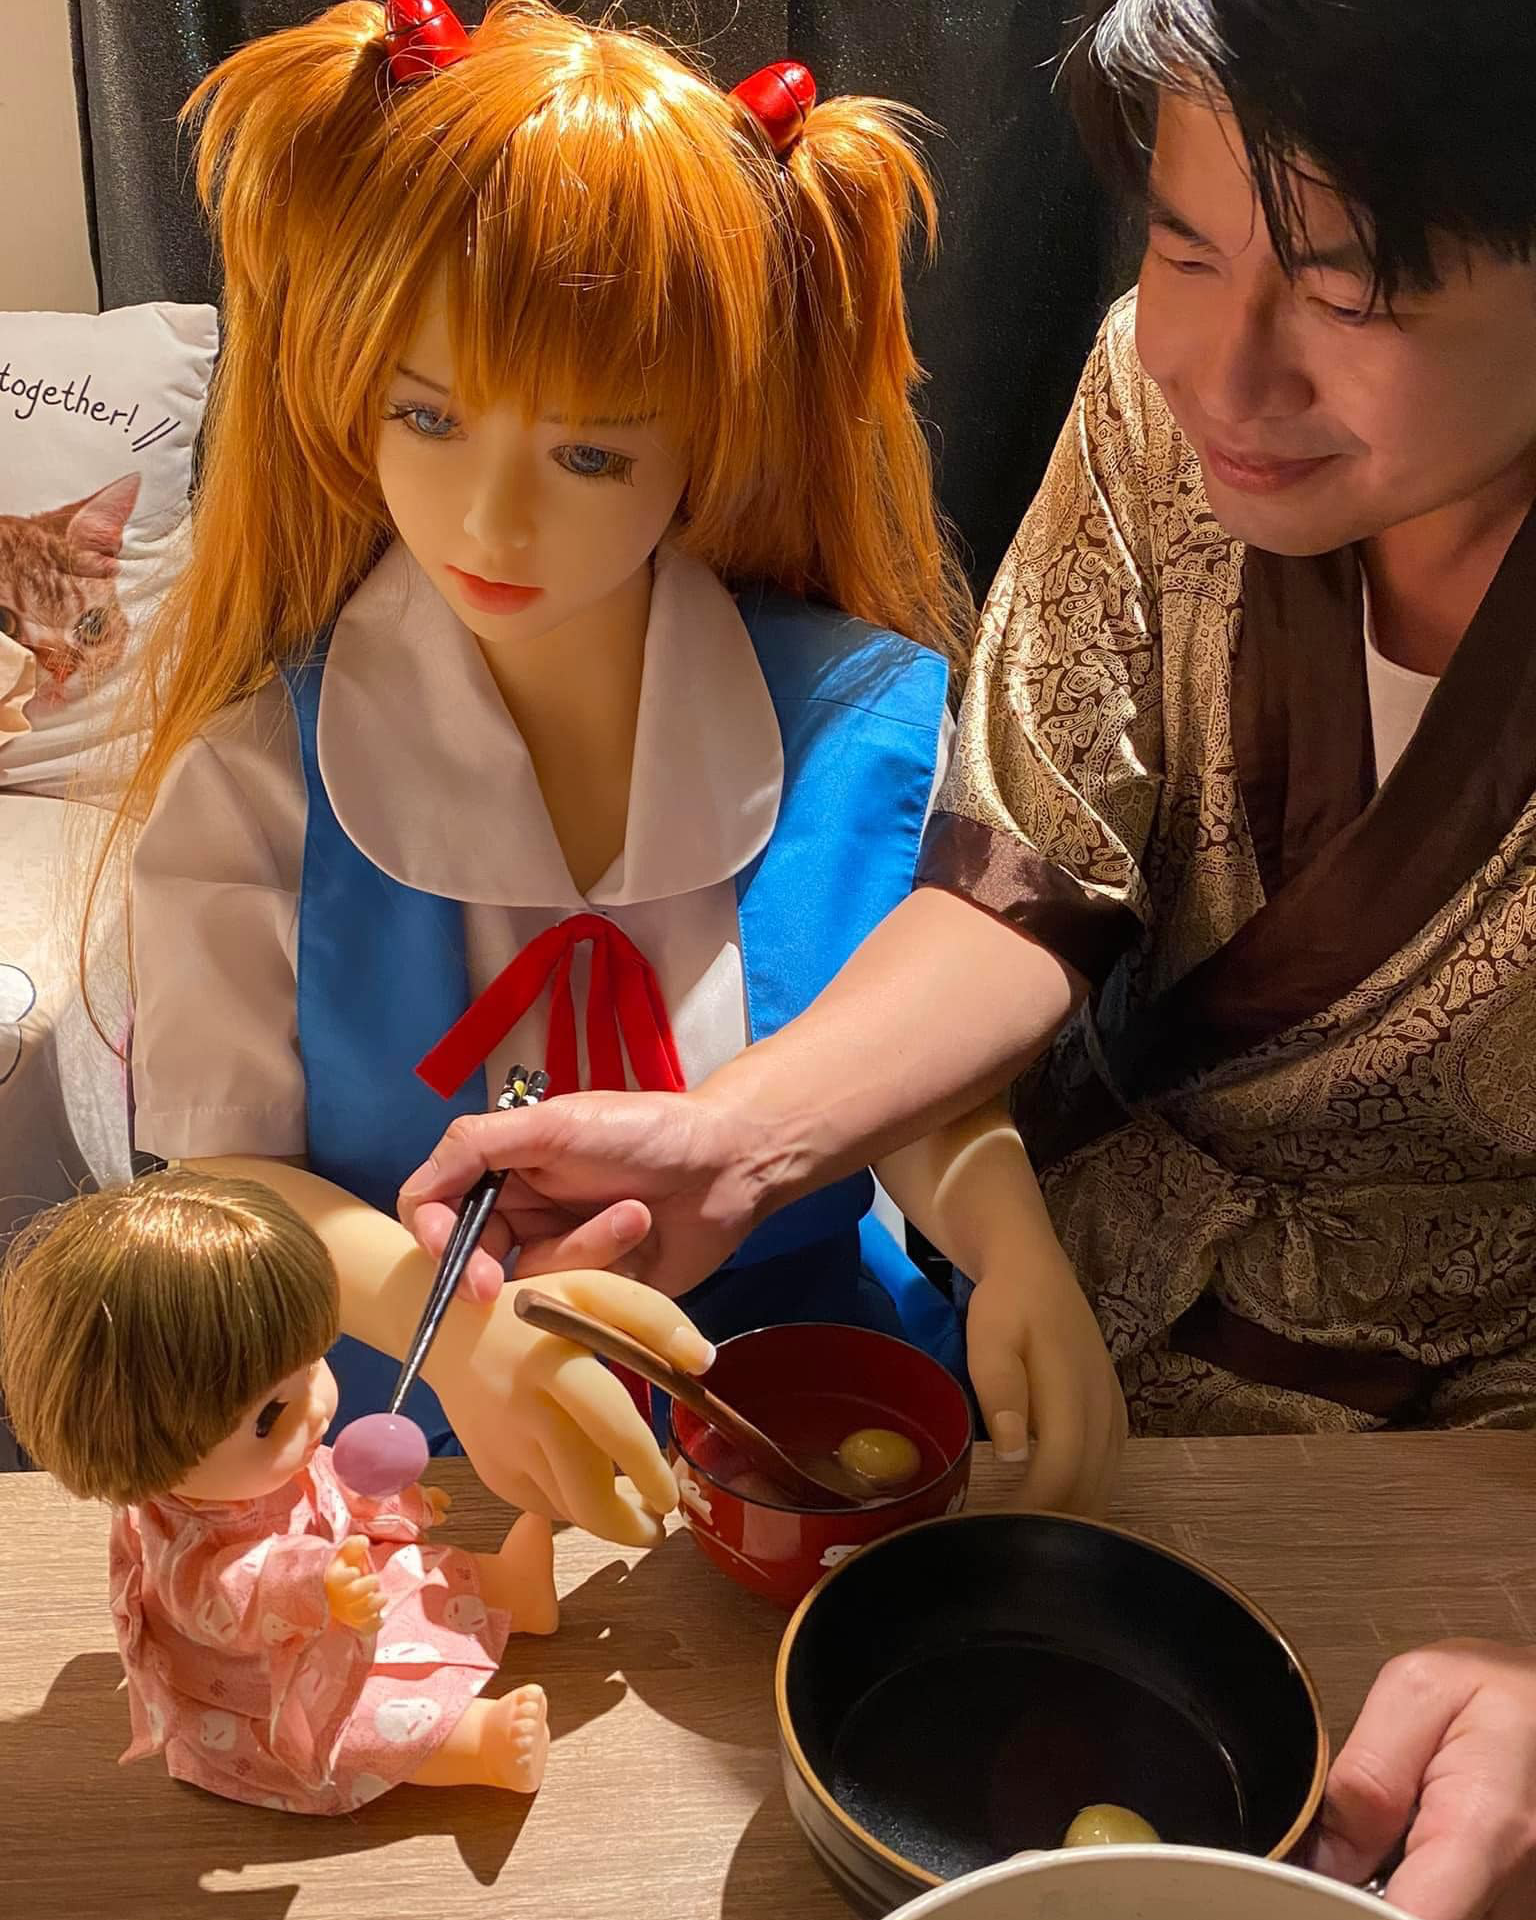 The man married an 'anime doll' as his wife because he did not want conflict in the family - Photo 7.